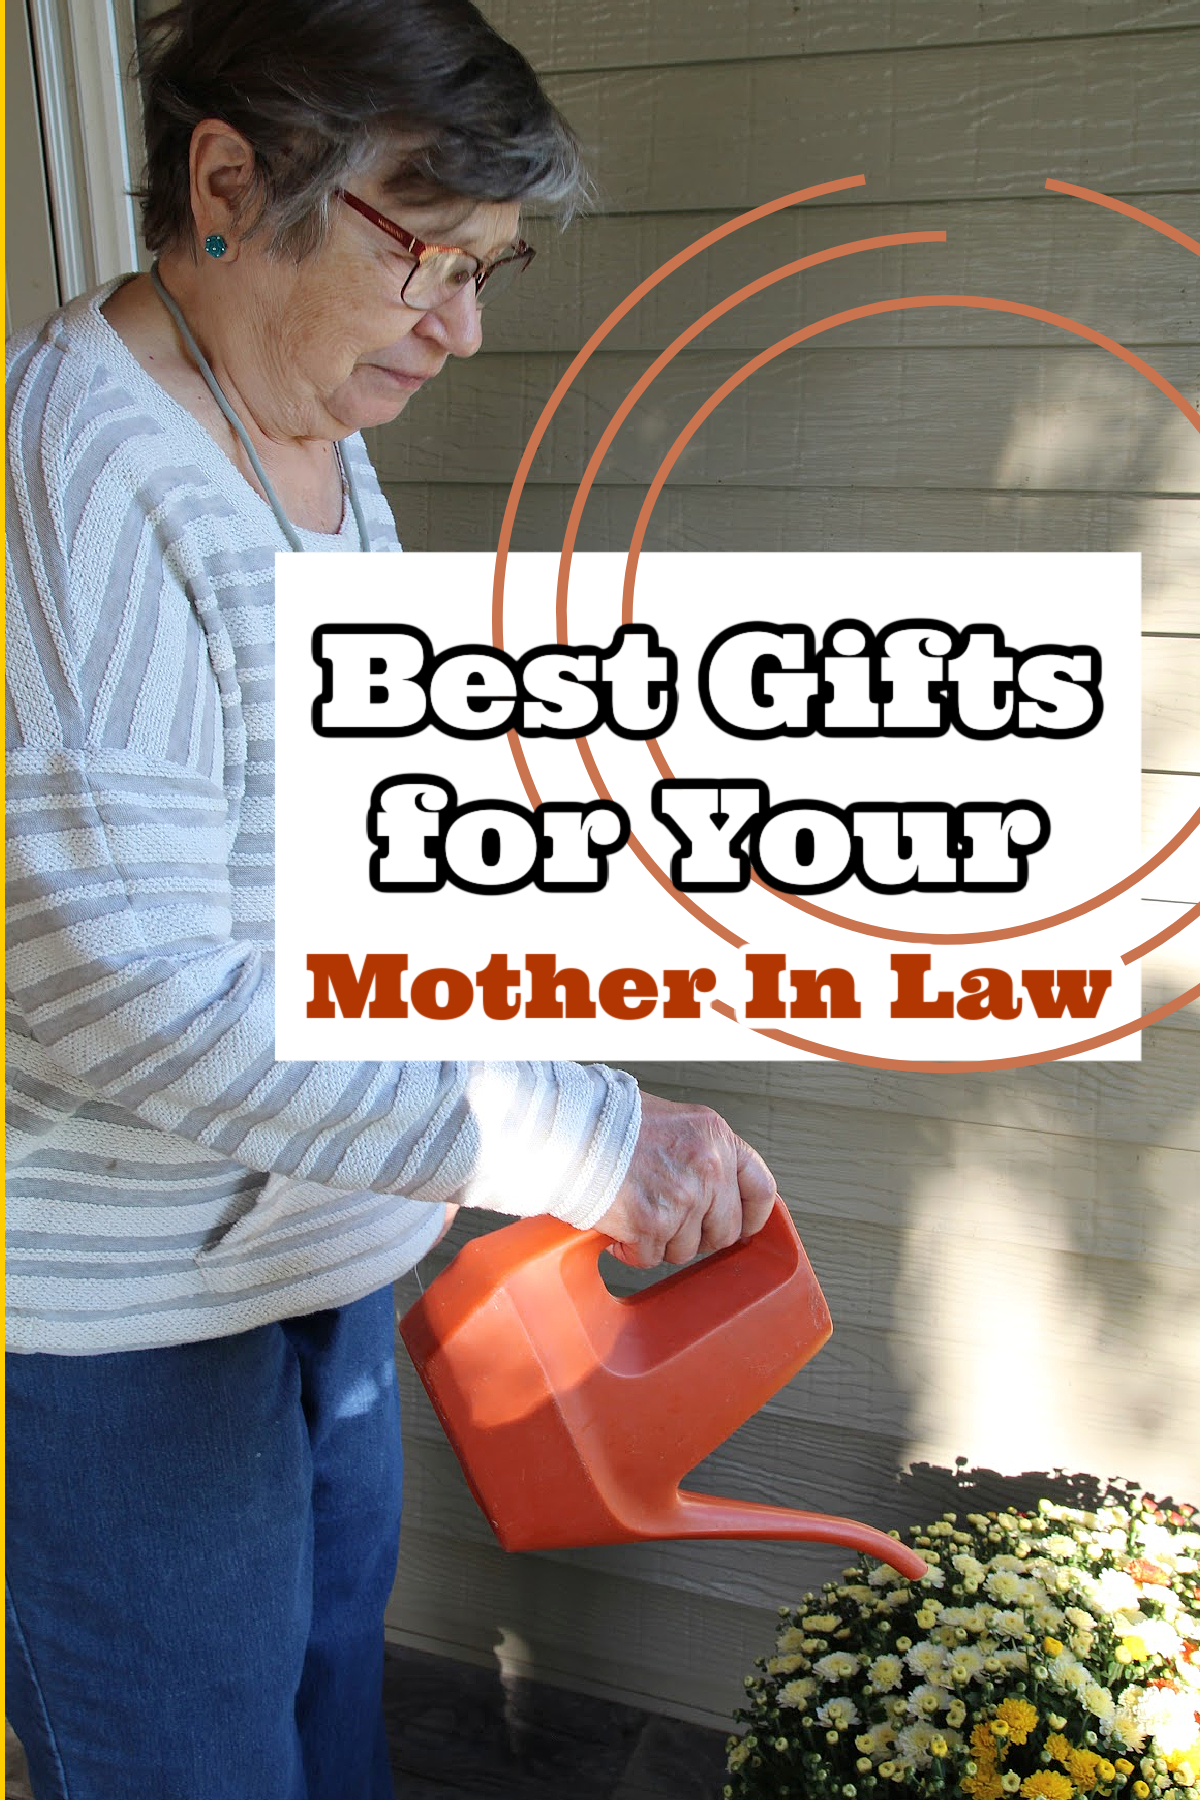 Best gifts for your mother in law